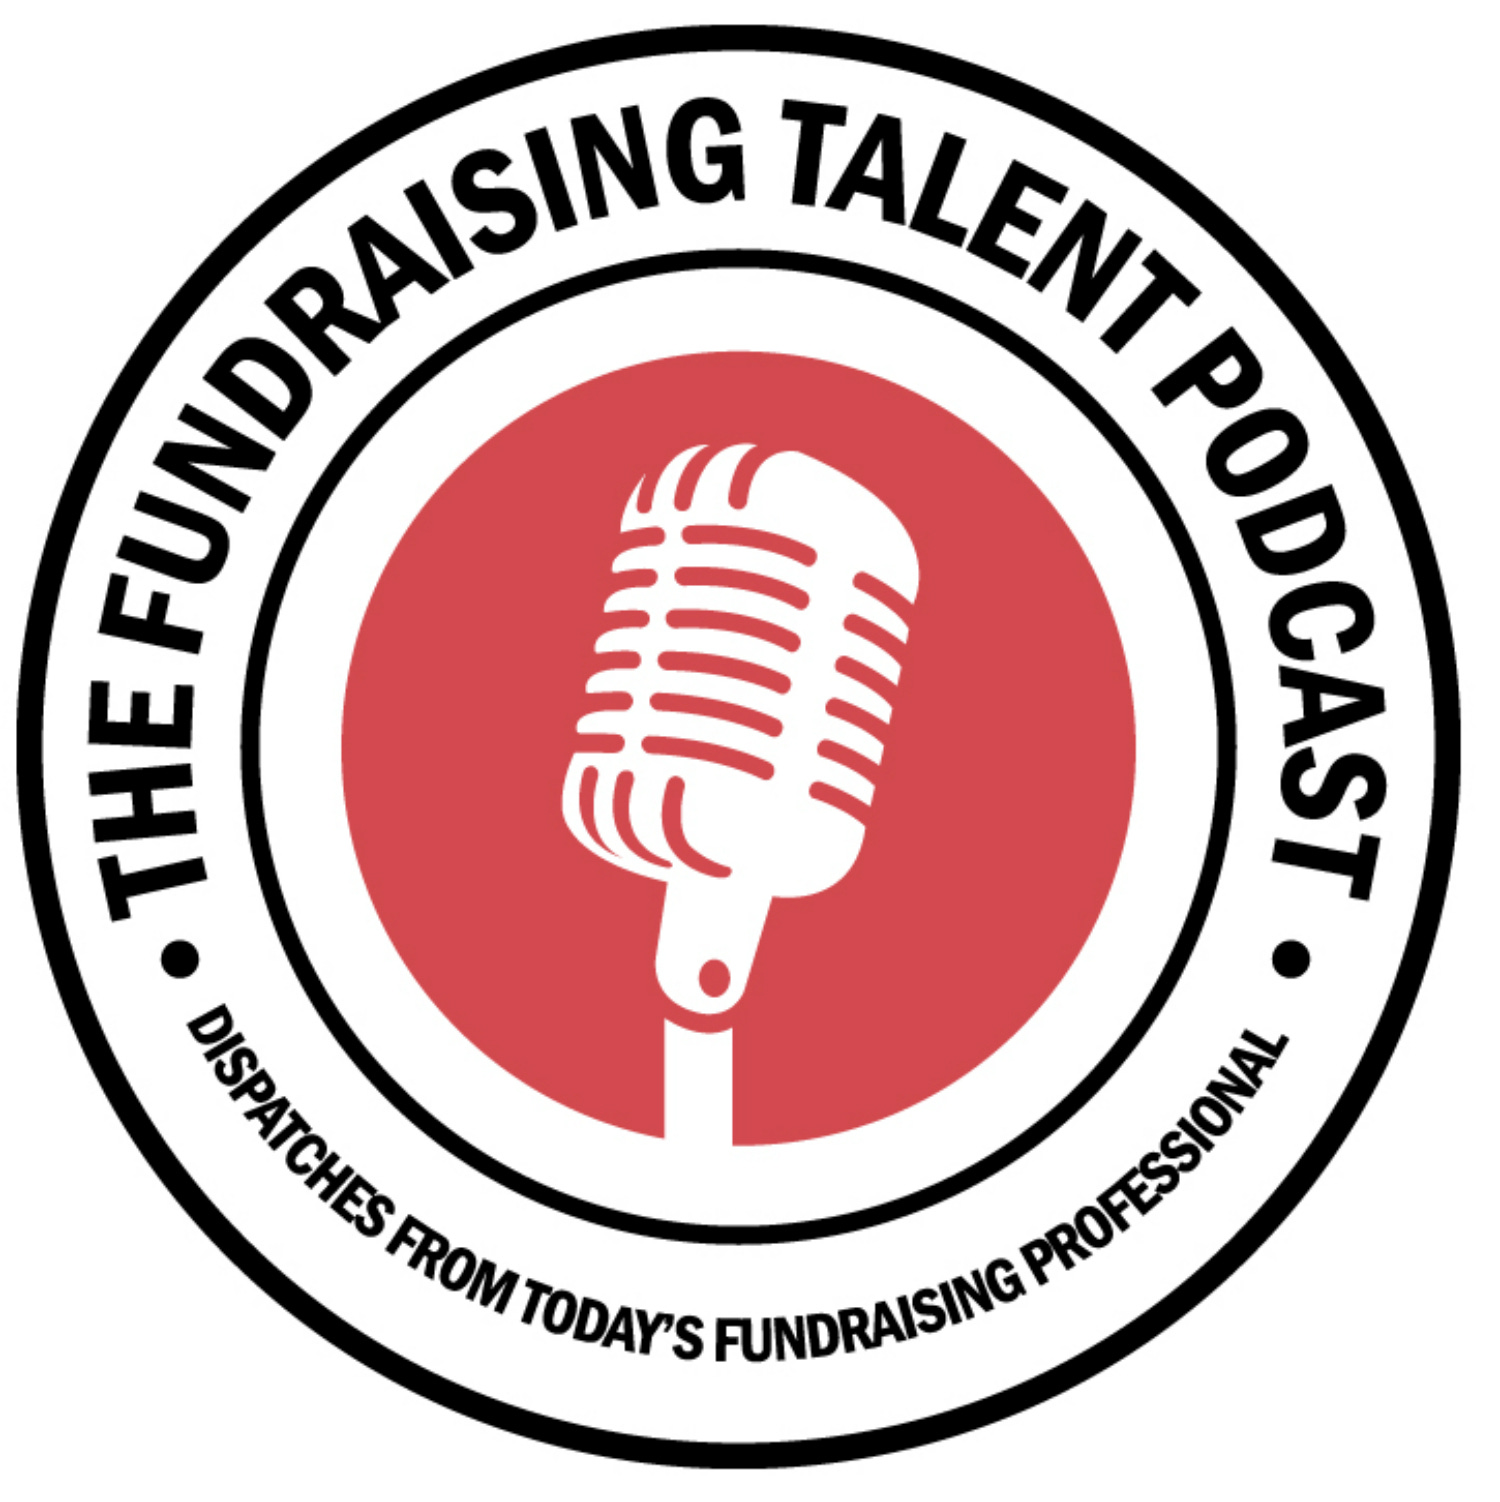 Are fundraising professionals patiently earning the right to ask?